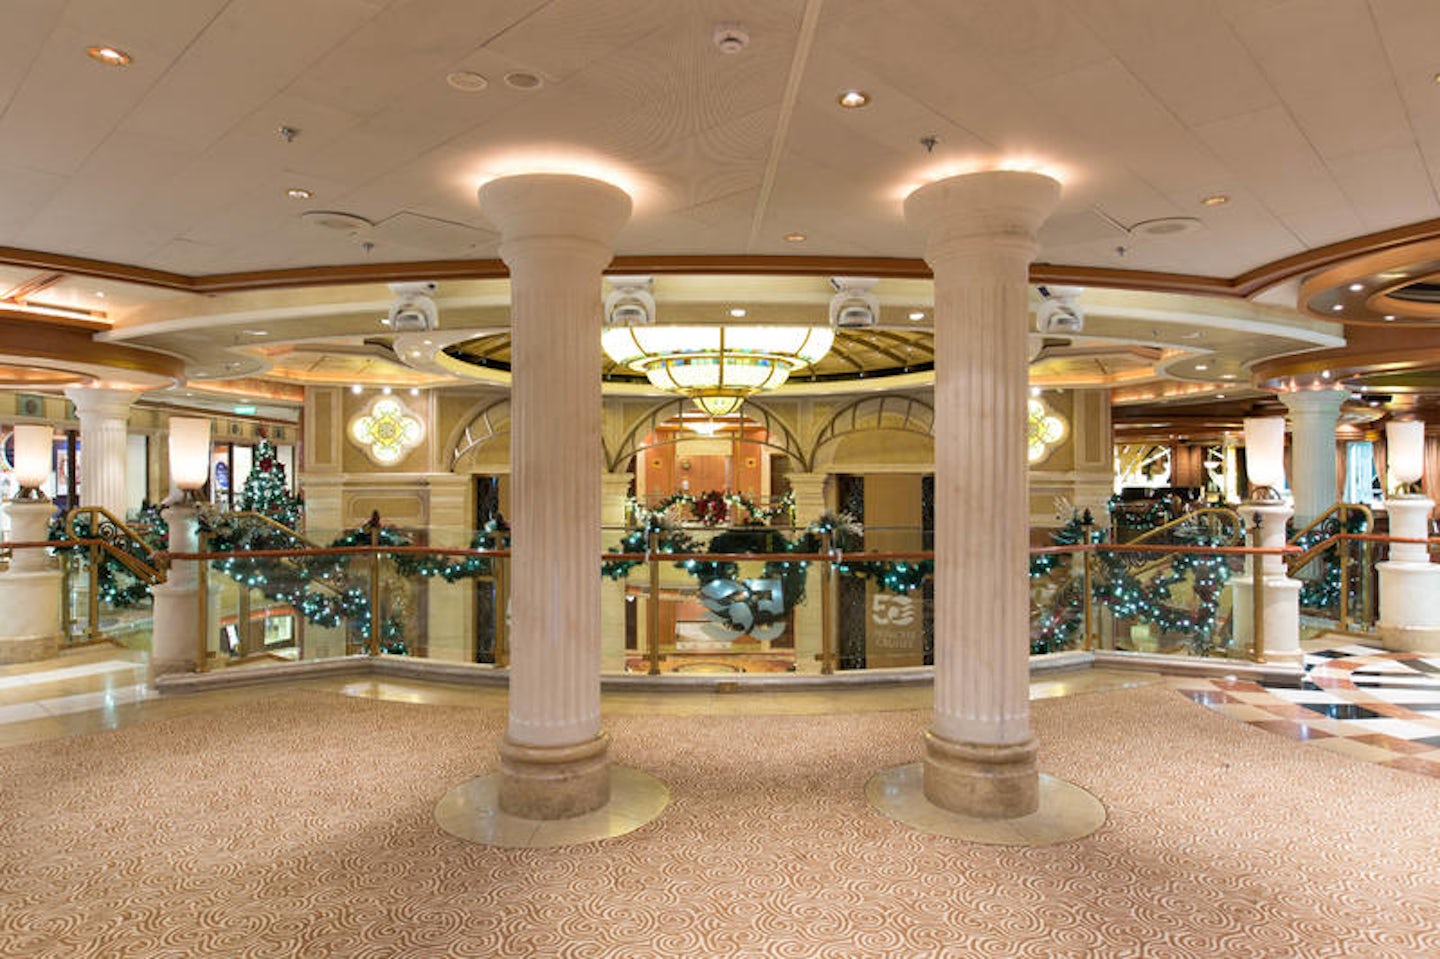 The Piazza on Crown Princess